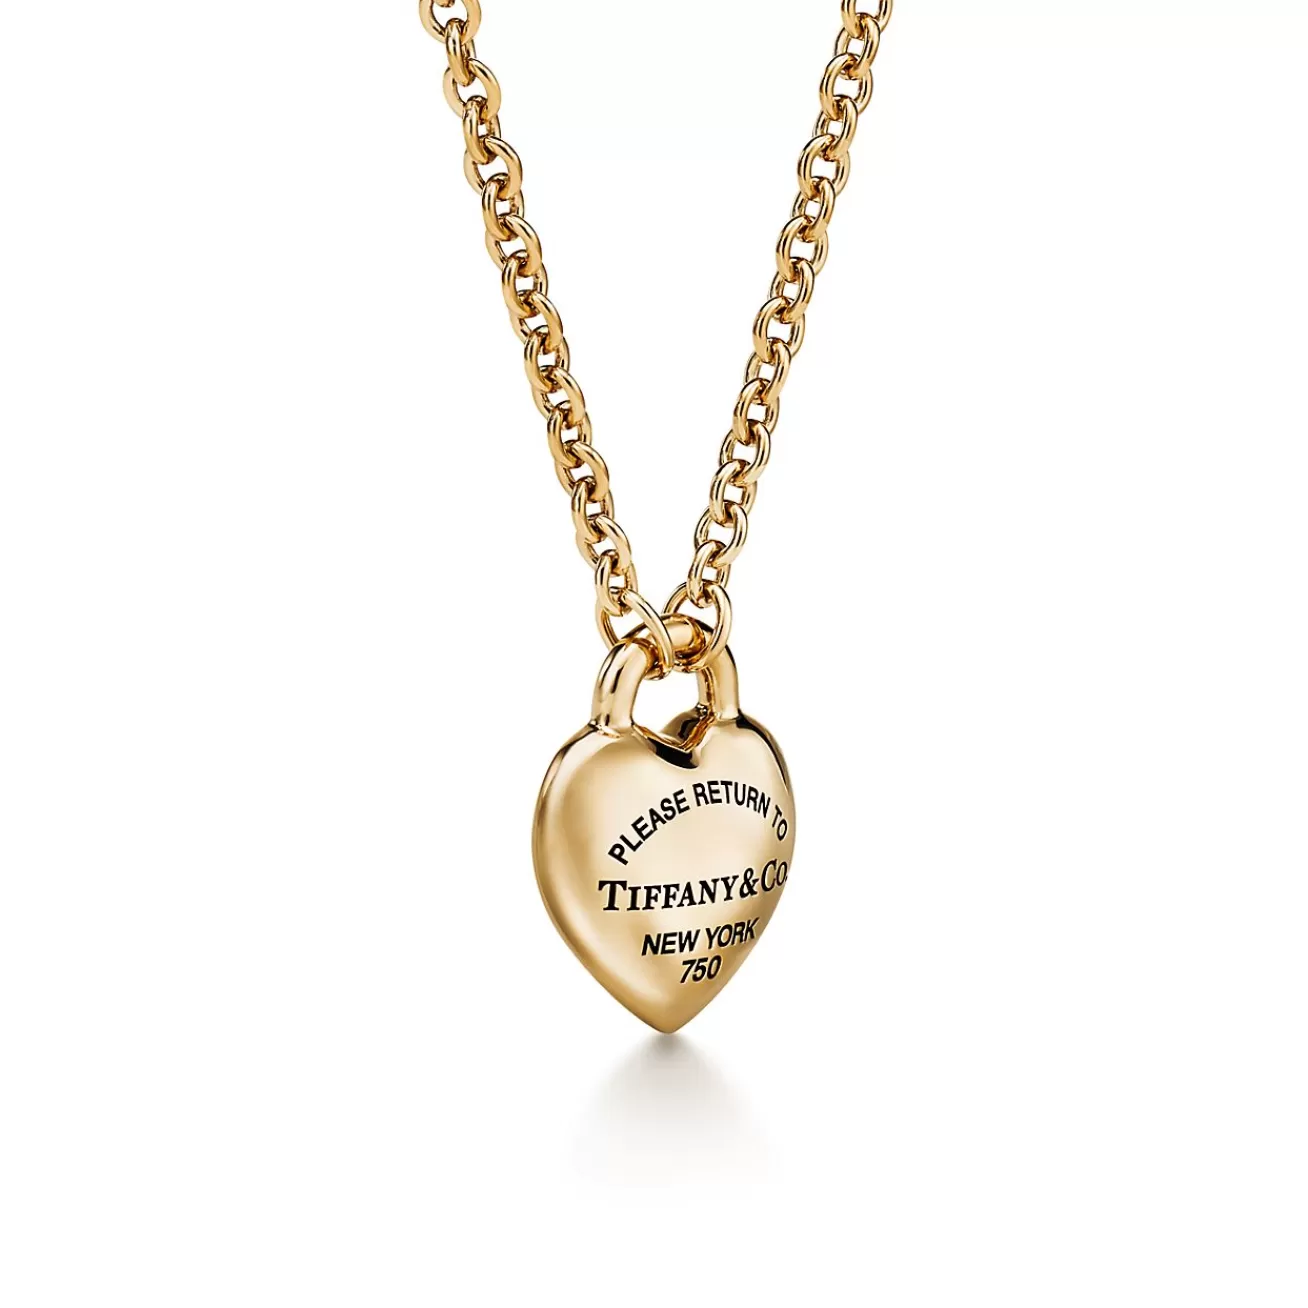 Tiffany & Co. Return to Tiffany® Full Heart Pendant in Yellow Gold | ^ Necklaces & Pendants | Gifts for Her